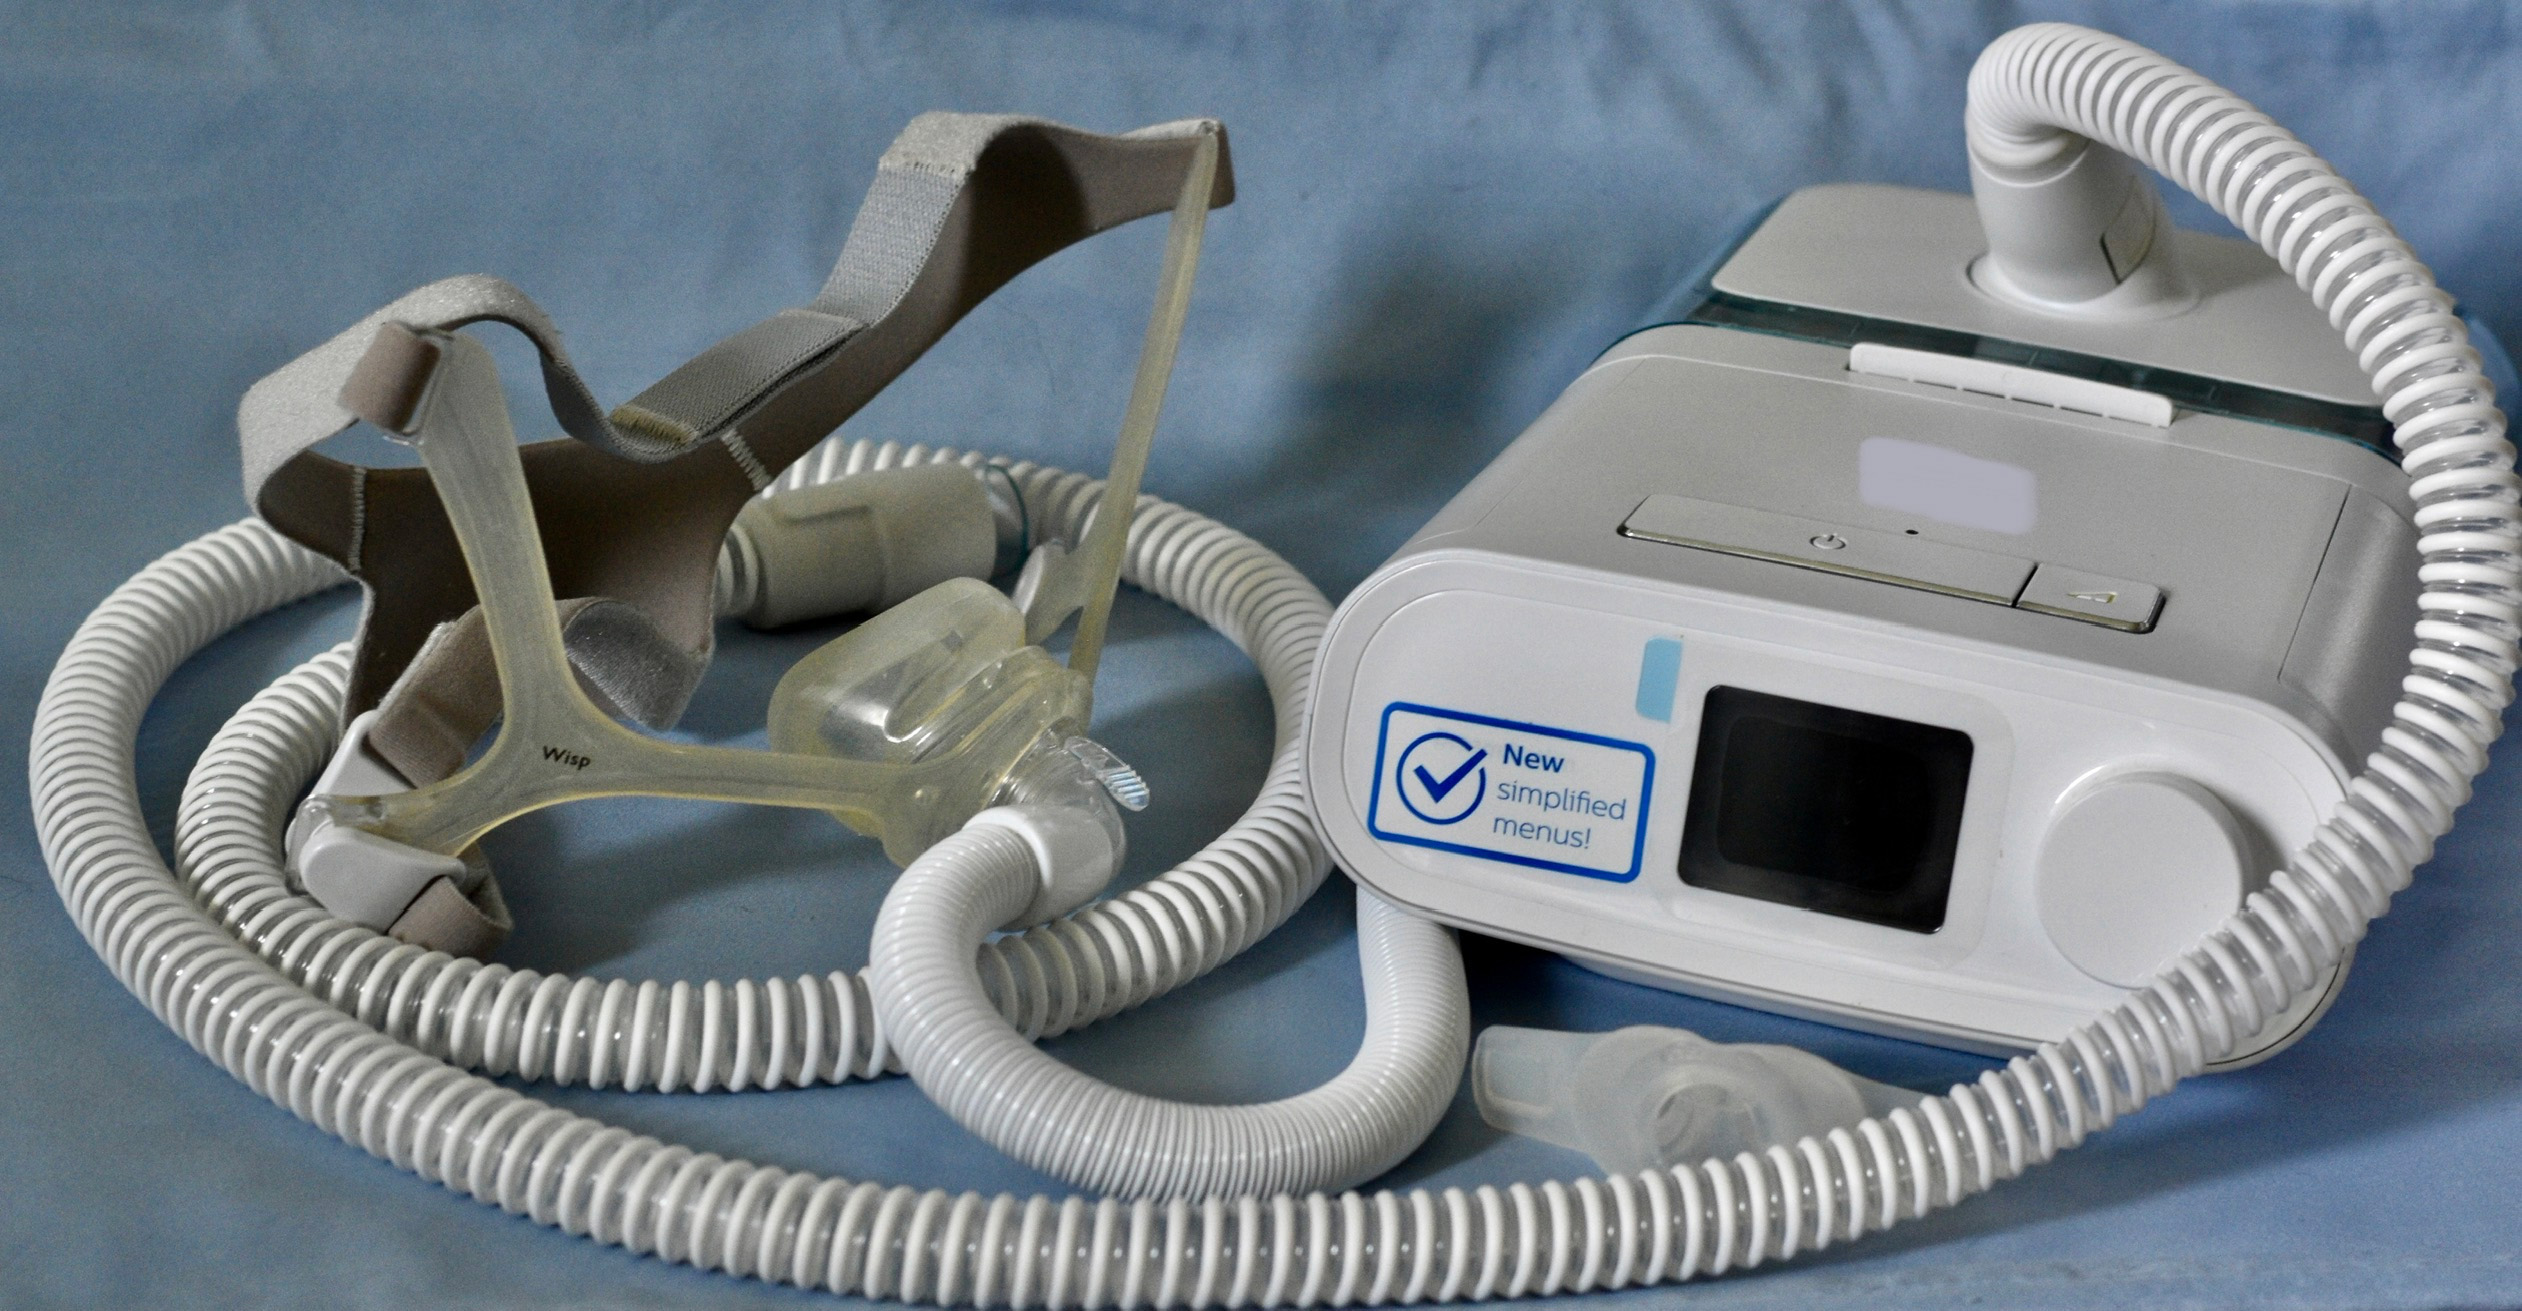 Philips kept warnings about dangerous CPAP machines secret while profits  soared